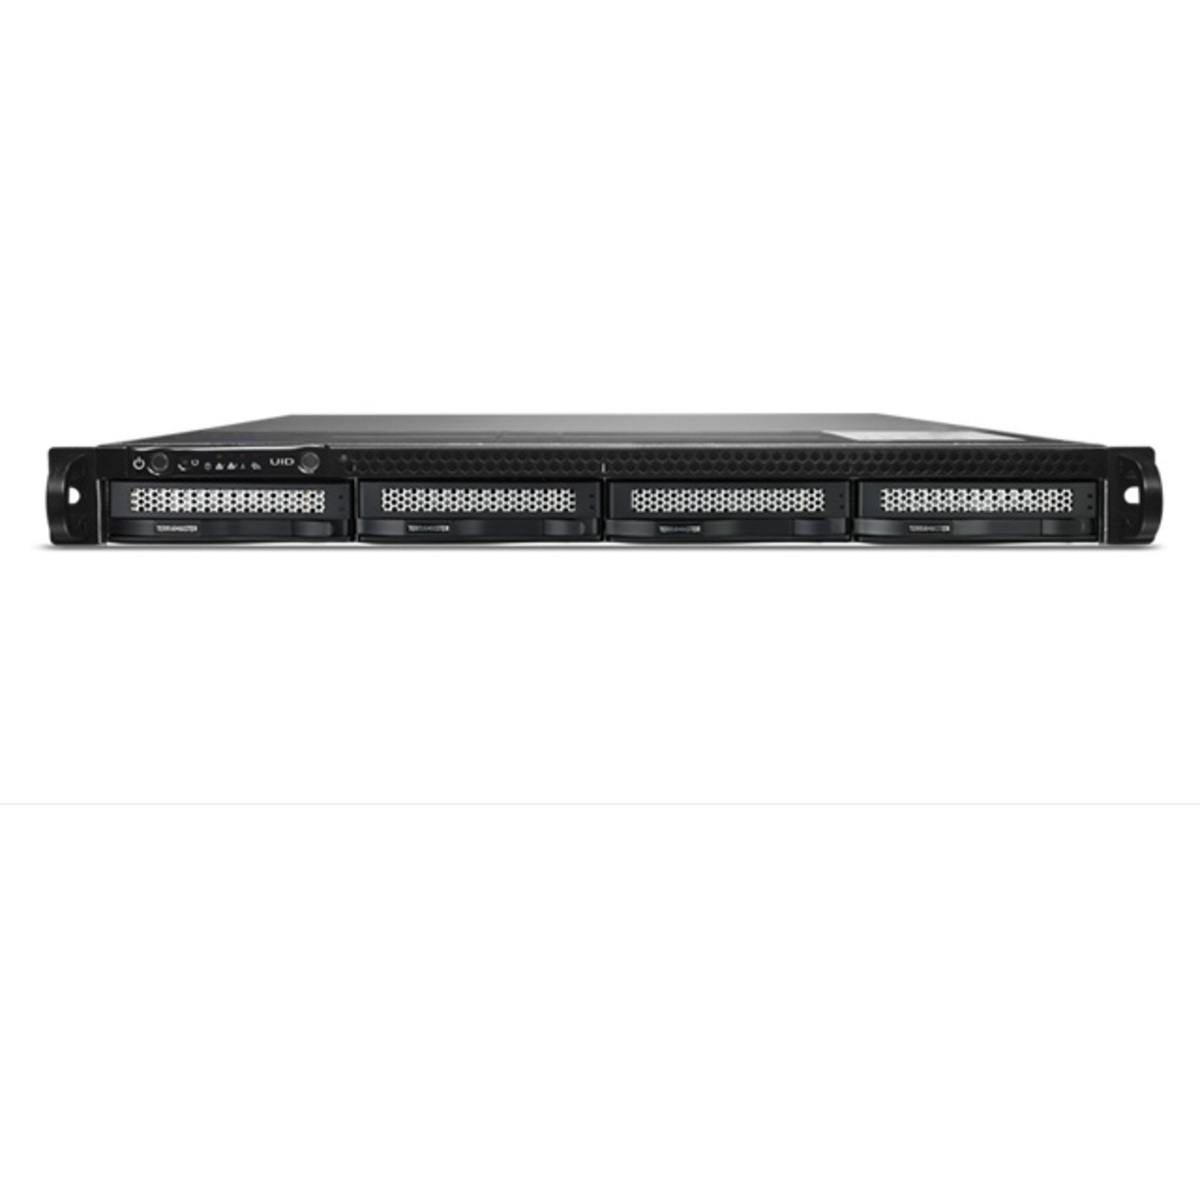 TerraMaster U4-111 72tb 4-Bay RackMount Multimedia / Power User / Business NAS - Network Attached Storage Device 3x24tb Seagate EXOS X24 ST24000NM002H 3.5 7200rpm SATA 6Gb/s HDD ENTERPRISE Class Drives Installed - Burn-In Tested U4-111